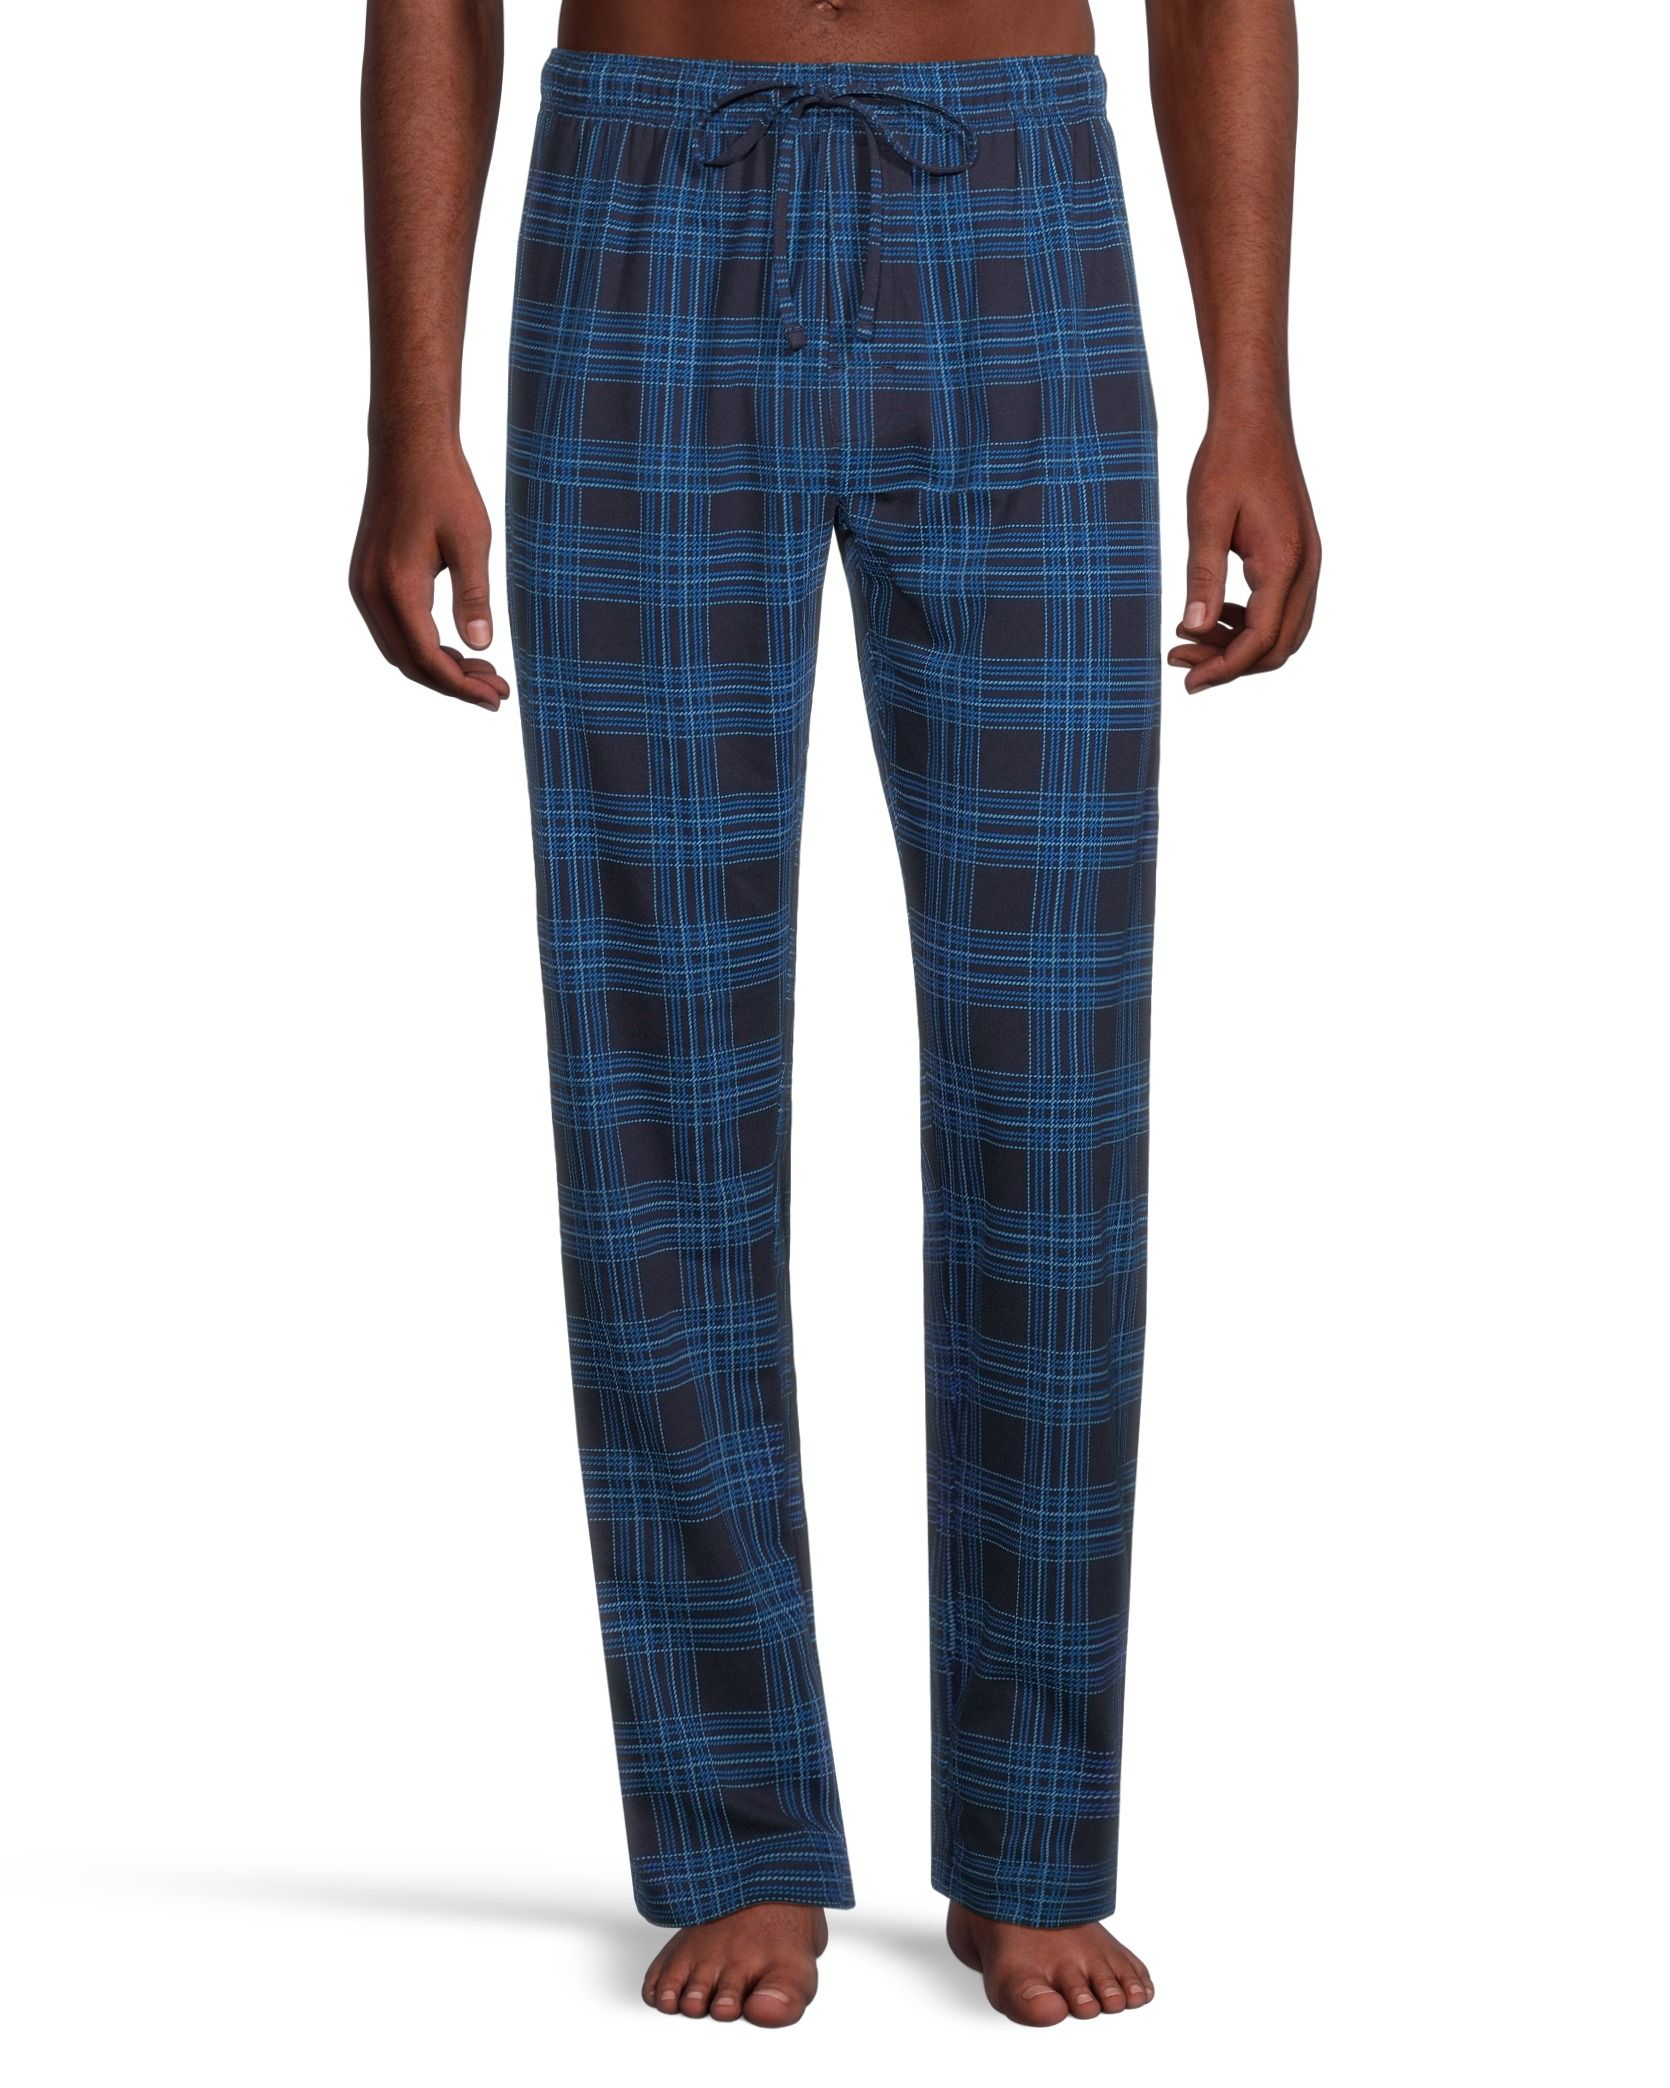 Members Only Men's Fleece Sleep Pant with Two Side Pockets - Multi Colored  Loungewear, Relaxed Fit Pajama Pants for Men, Blue Plaid XL